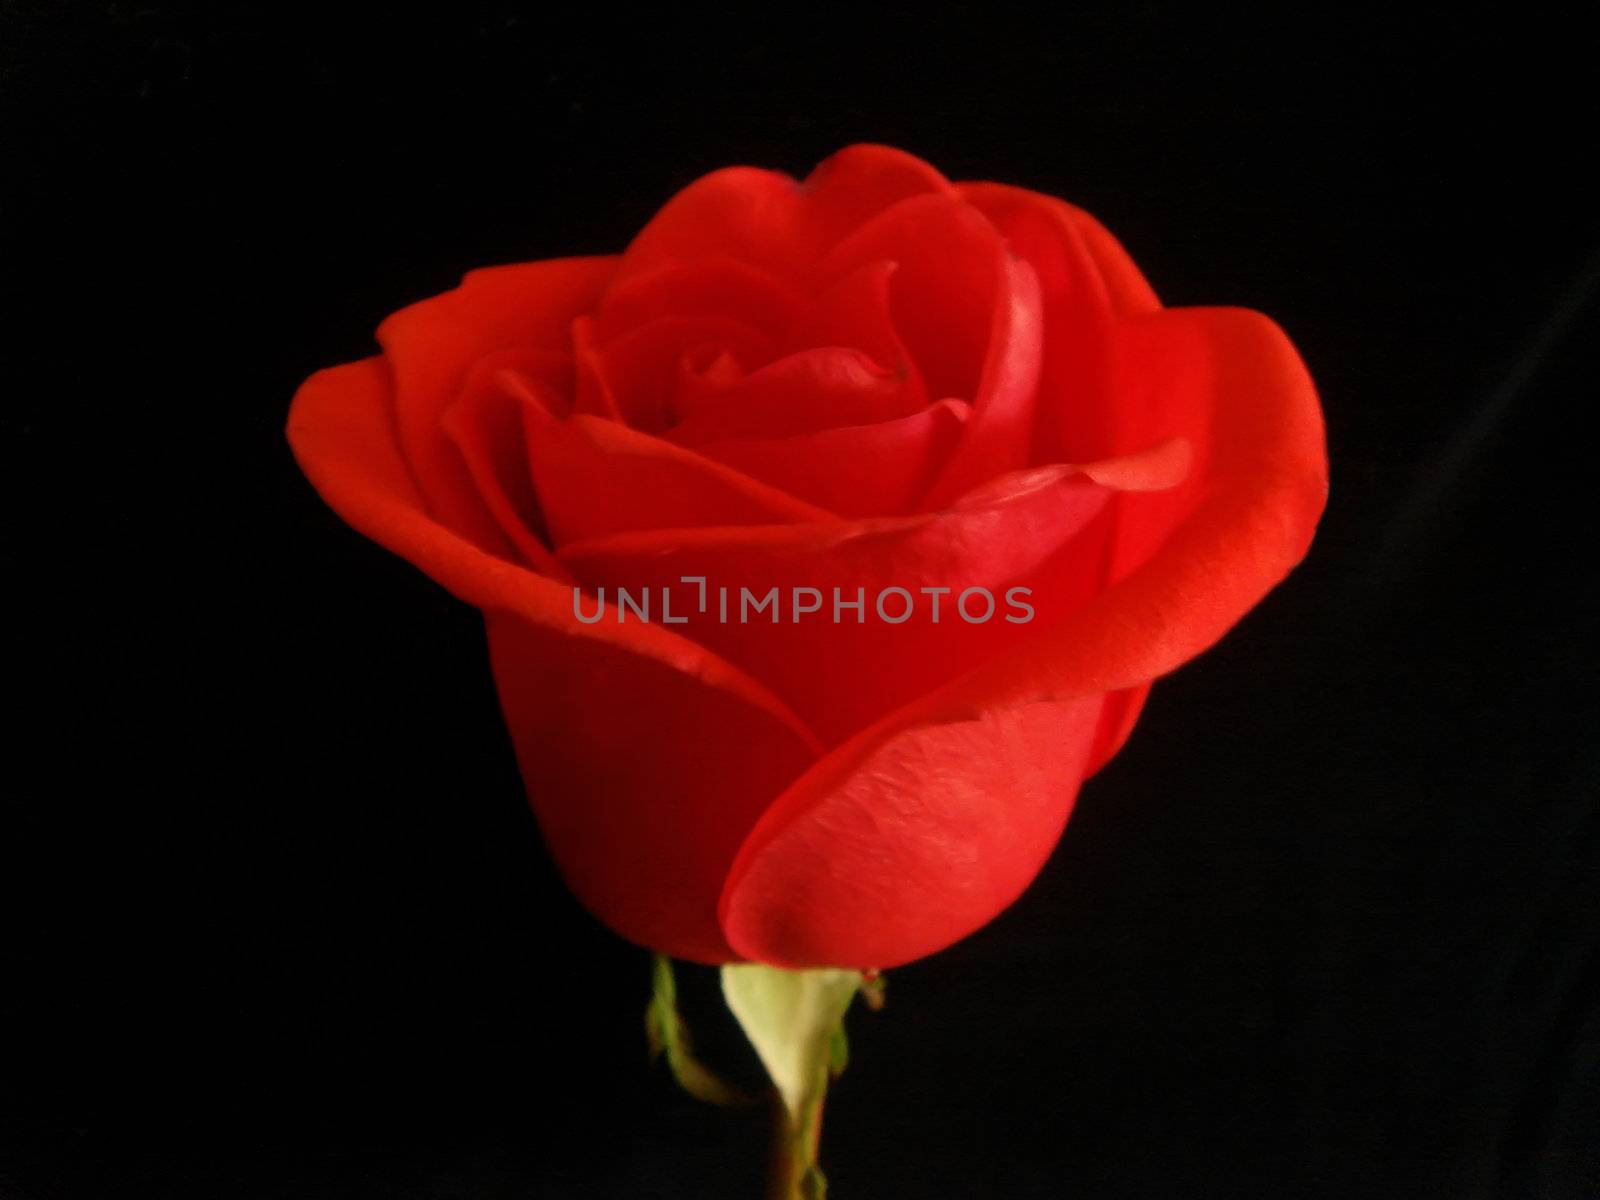 beautiful red rose - love and romance symbol 